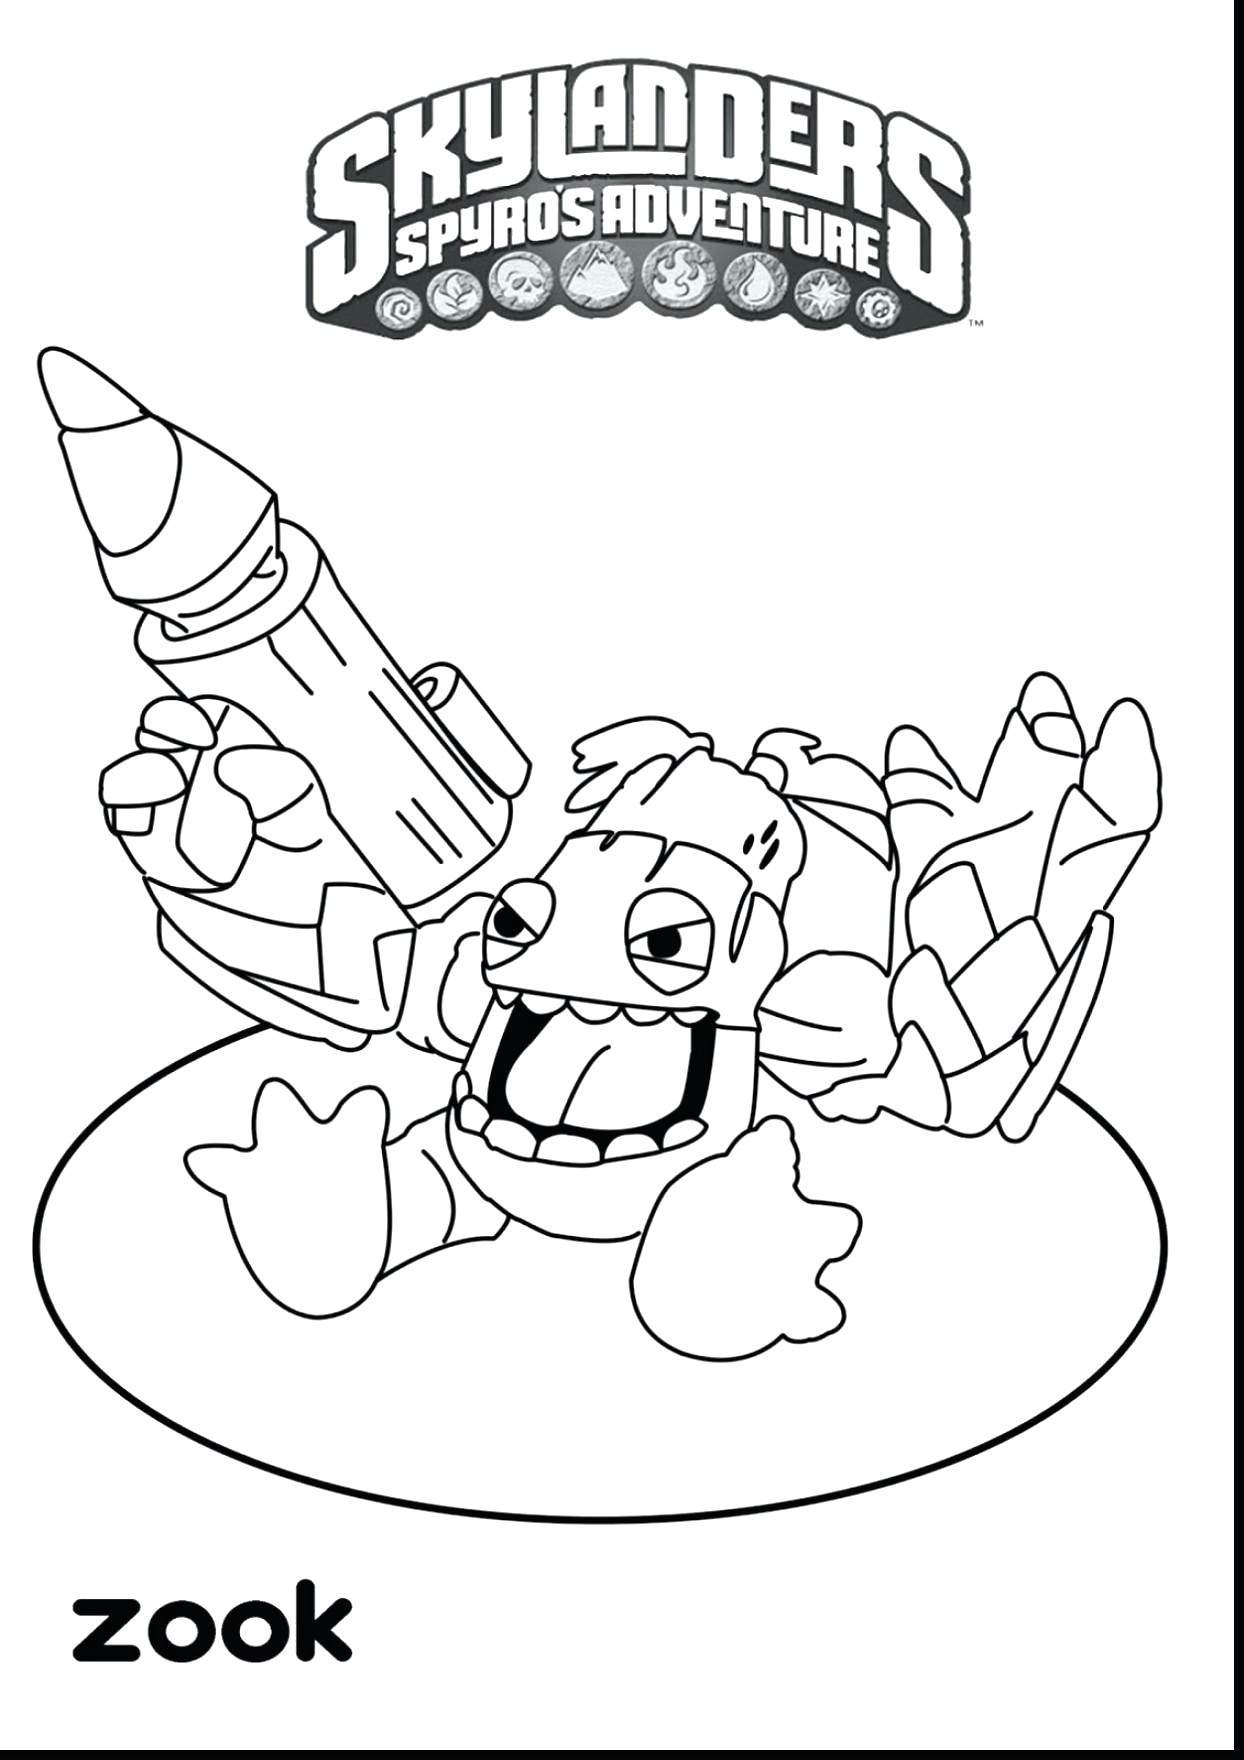 Cartoon Drawing for Colouring Www Colouring Pages Brilliant Easy to Draw Instruments Home Coloring